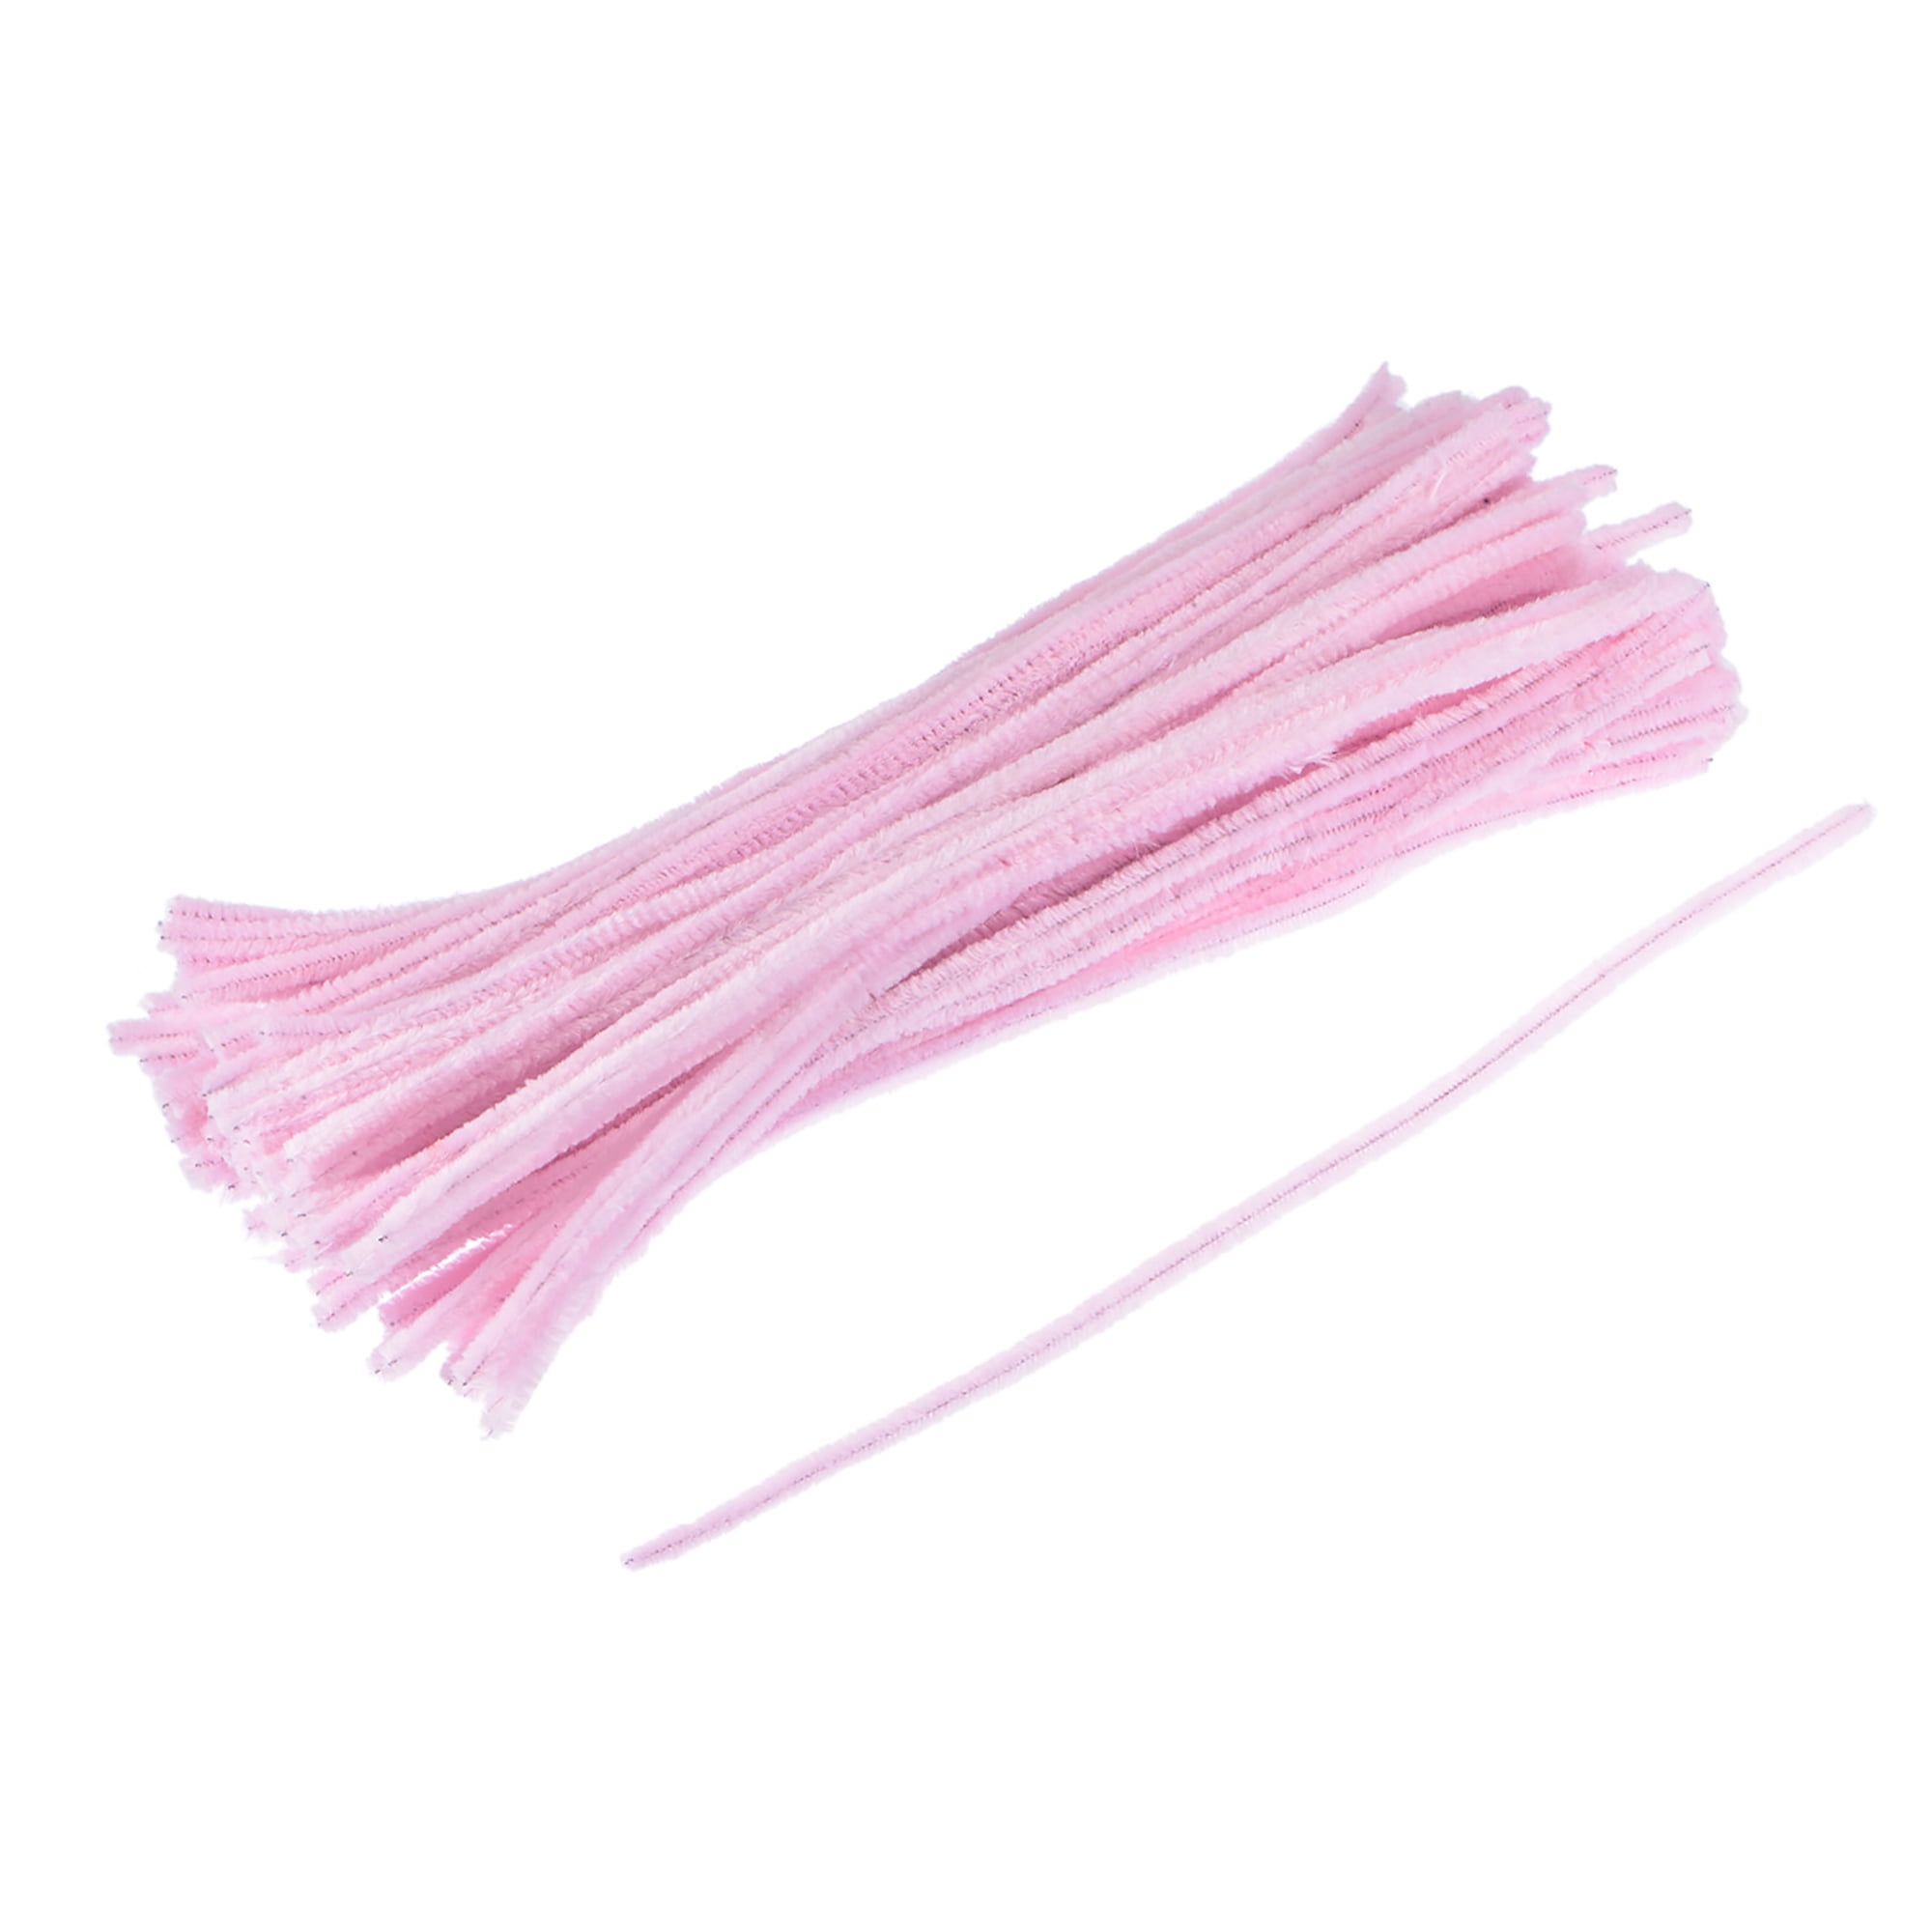 Long Bump Chenille Stems Pipe Cleaners 15mm x 3mm x 12 (Asst